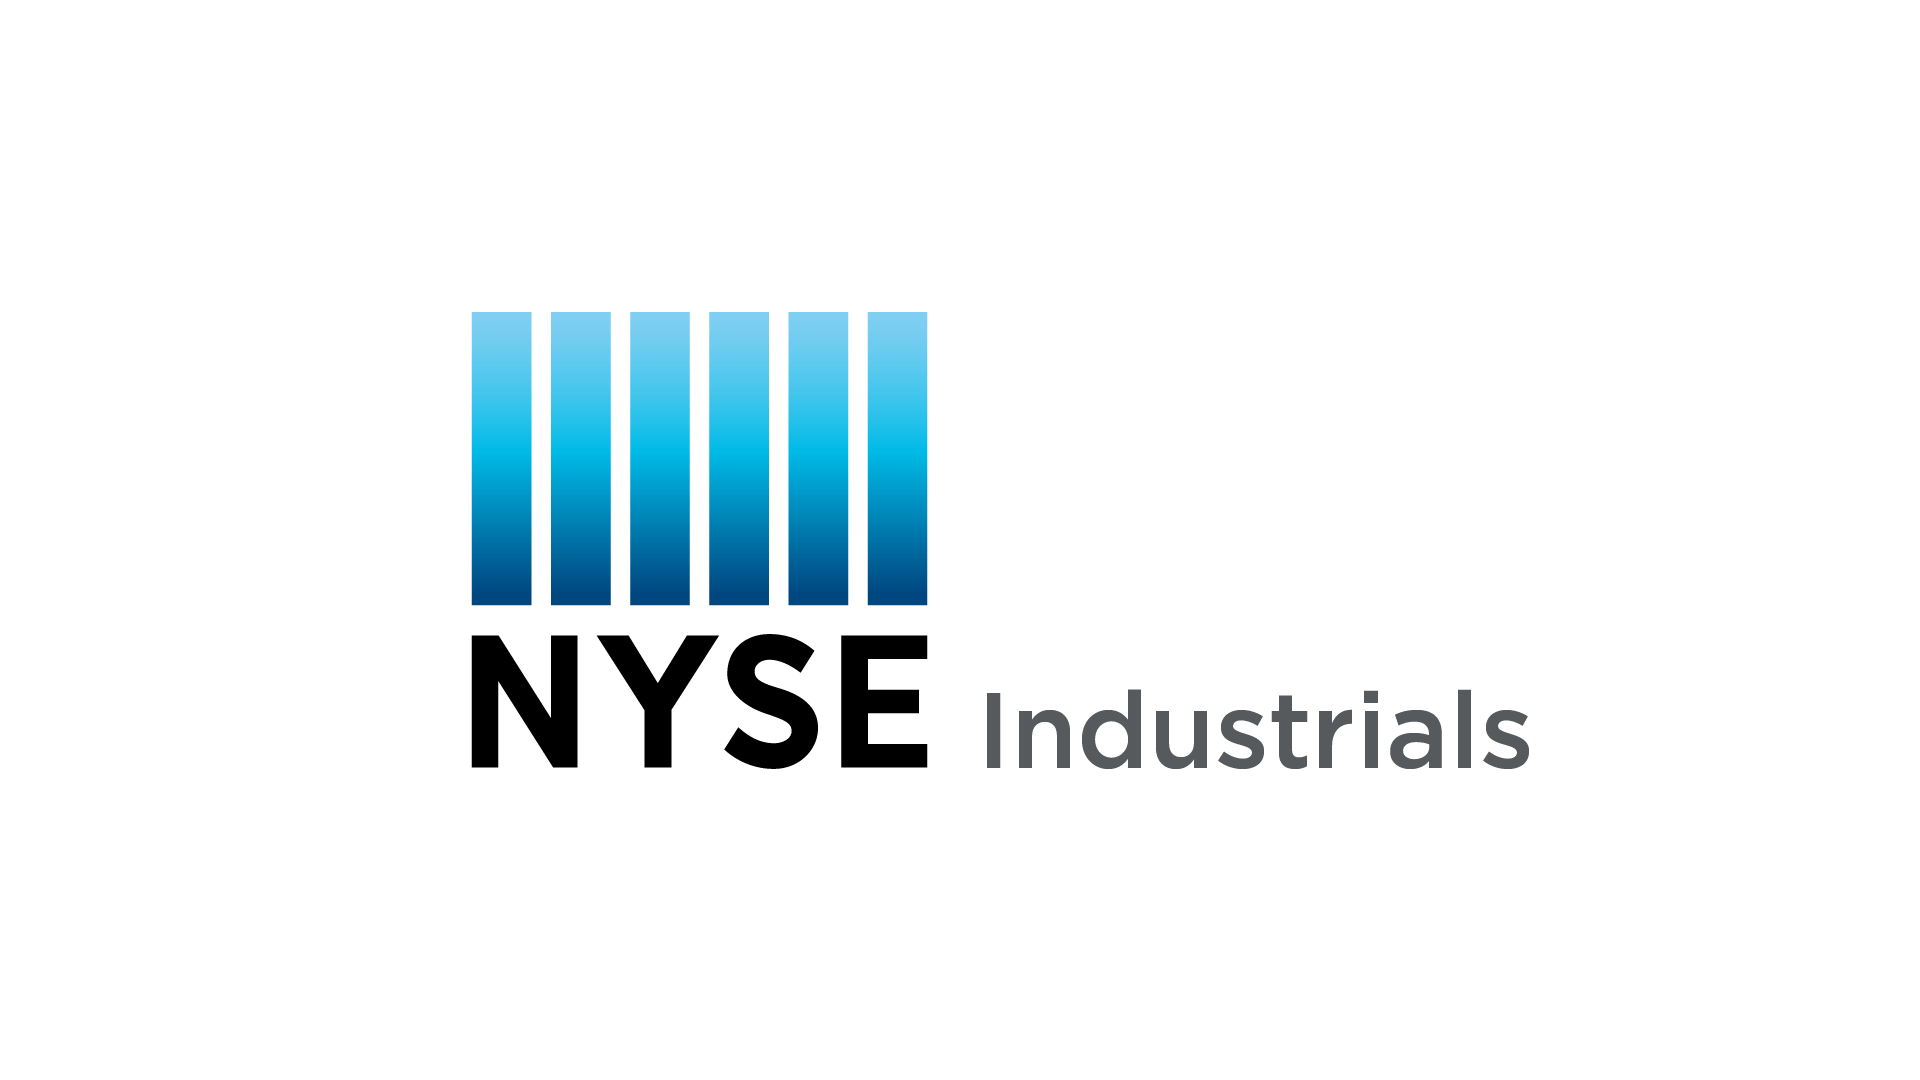 NYSE Logo - August 2019